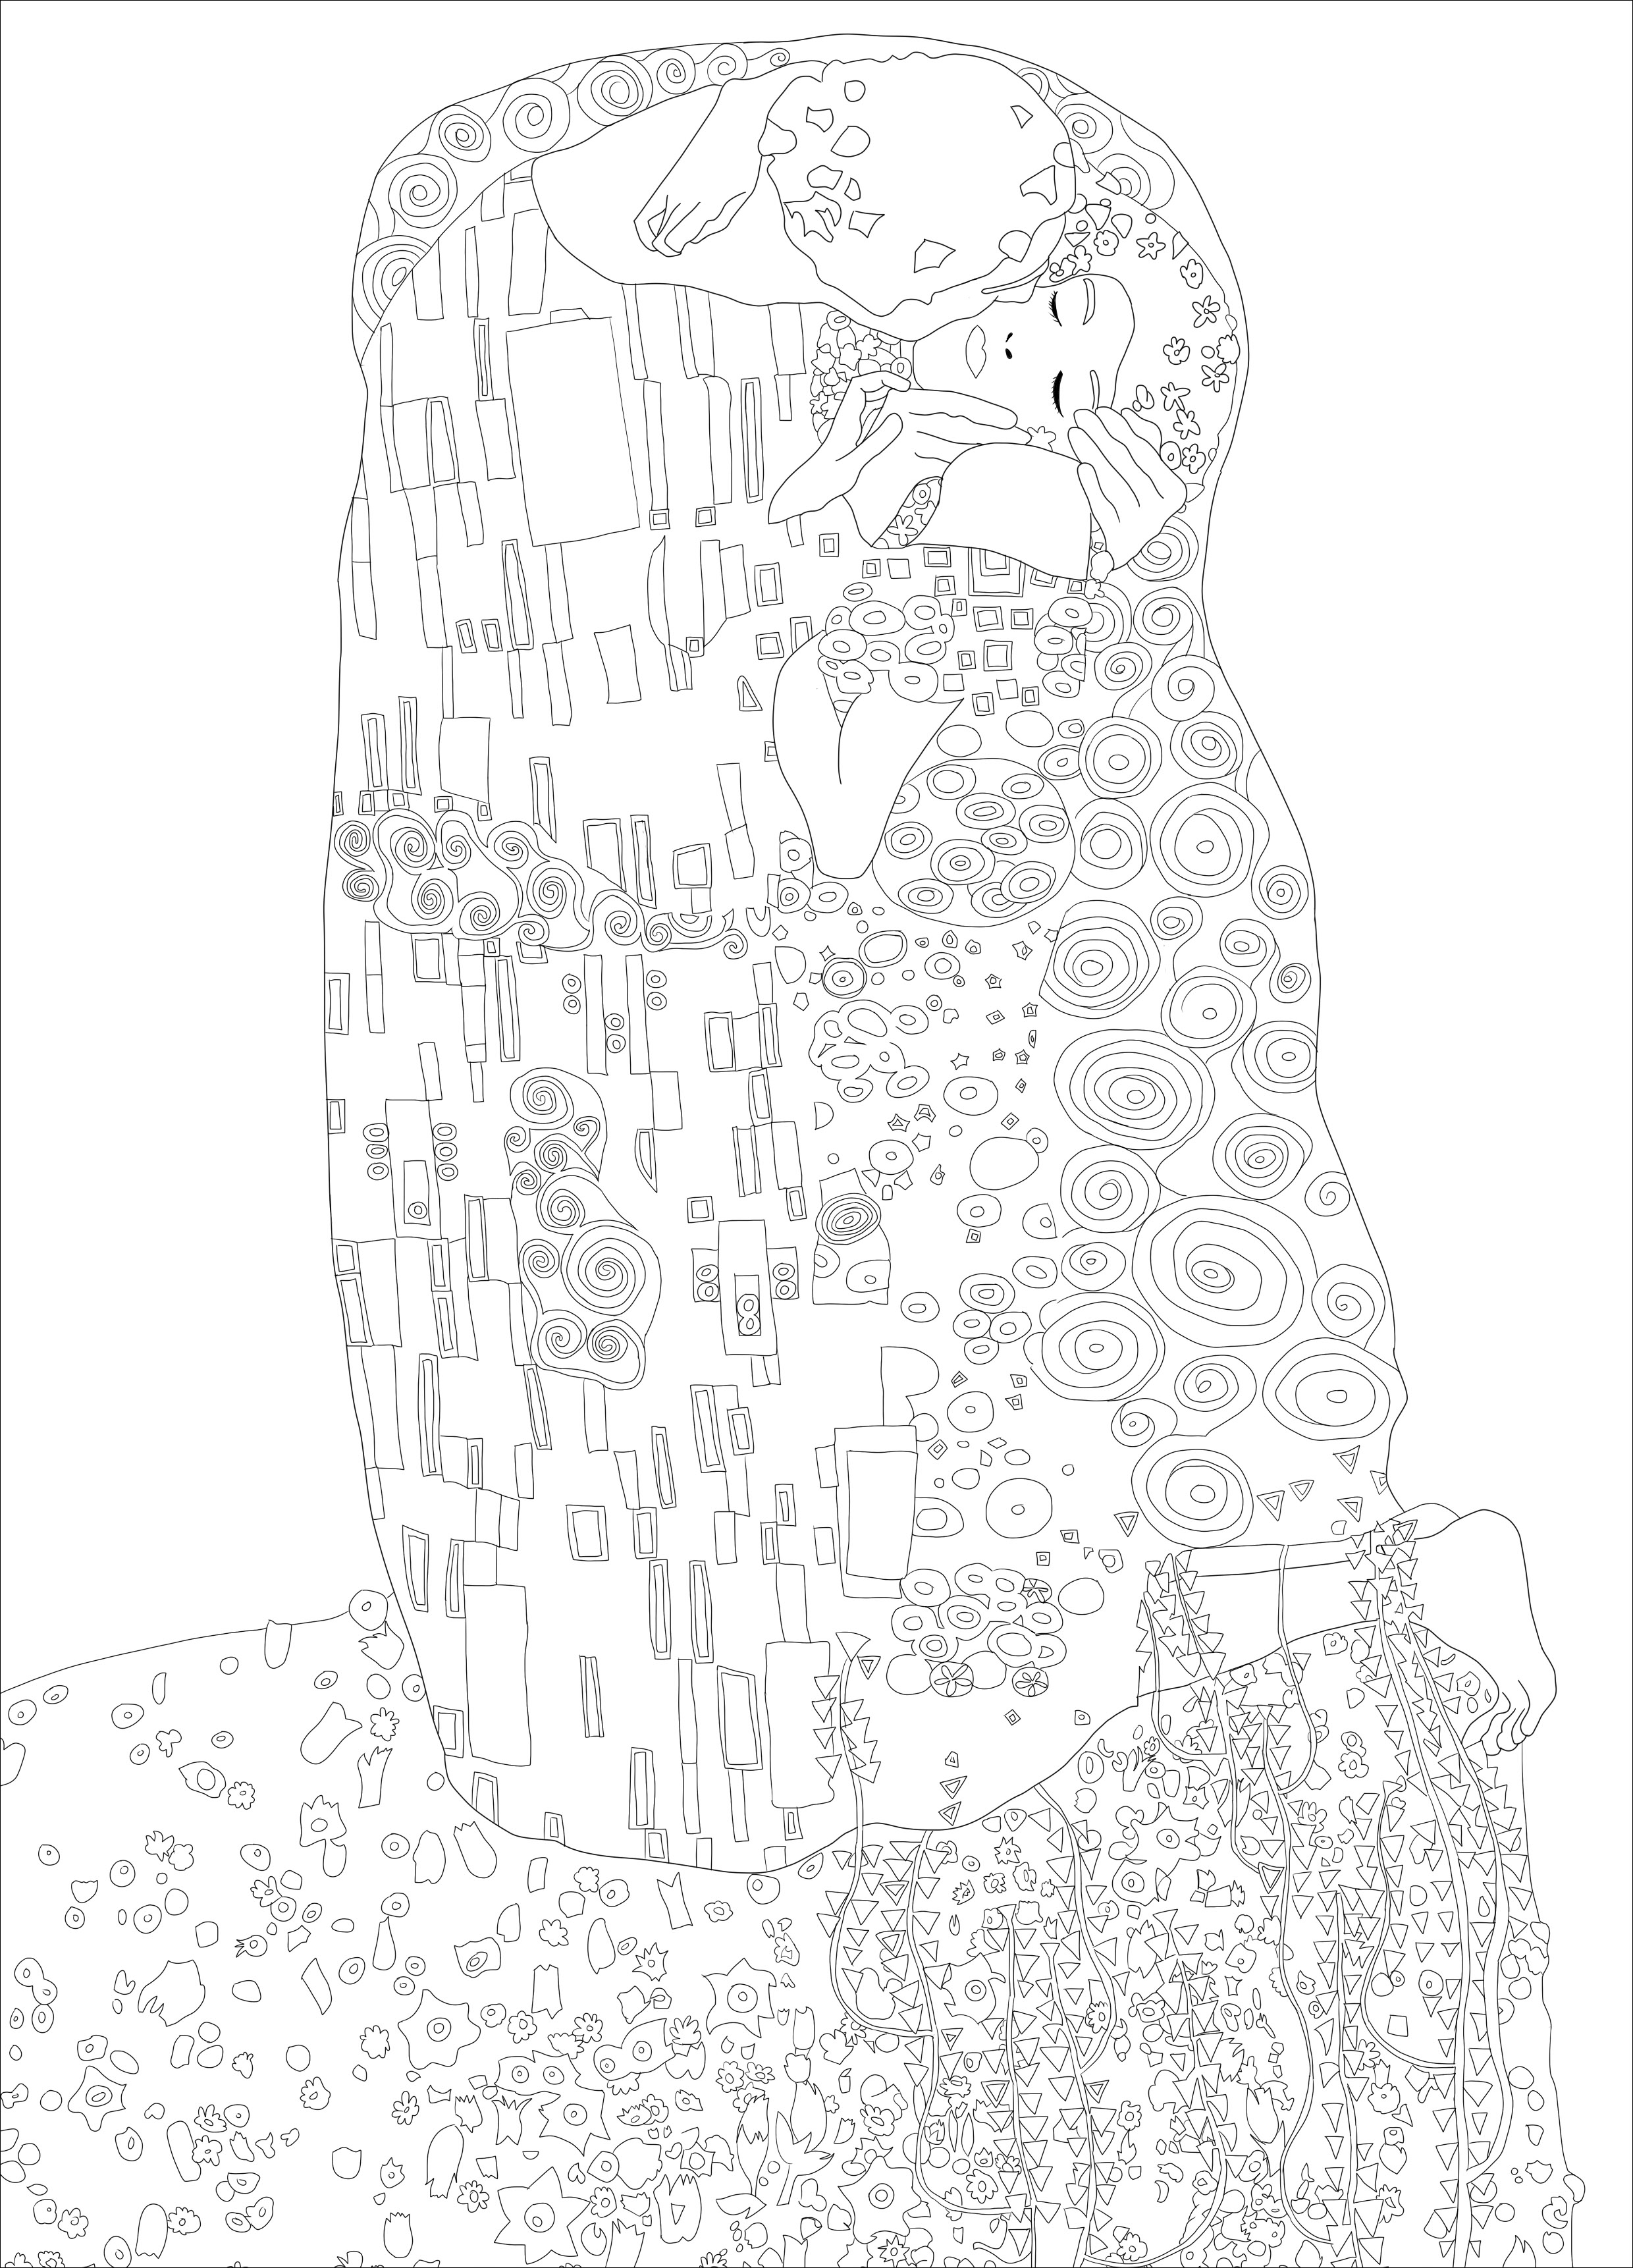 Coloring page created from the painting 'The Kiss' by Gustav Klimt. The painting is considered a masterpiece of the Art Nouveau movement and is one of Klimt's most popular works. It is currently housed at the Österreichische Galerie Belvedere museum in Vienna, Austria. The painting is known for its sensual and erotic nature, and its use of gold leaf and other decorative elements in the composition, Artist : Ji. M